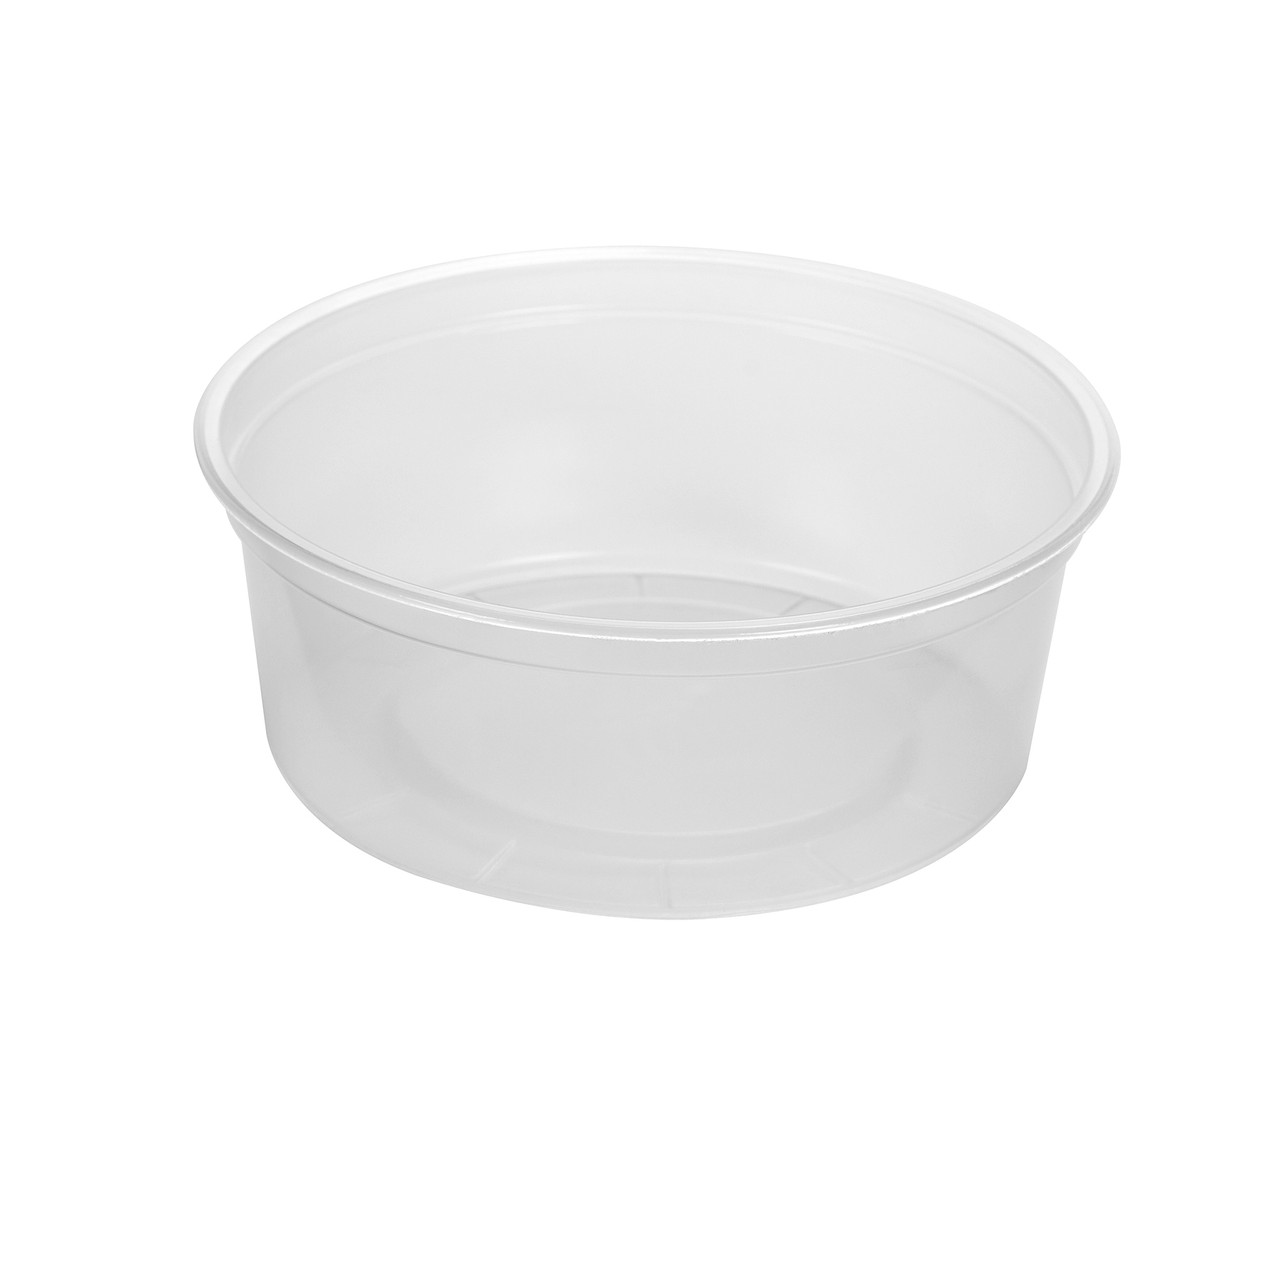 Deli Containers 8 fl oz (237ml) Clear Deli Container (in printed retail bags) (ADS08)